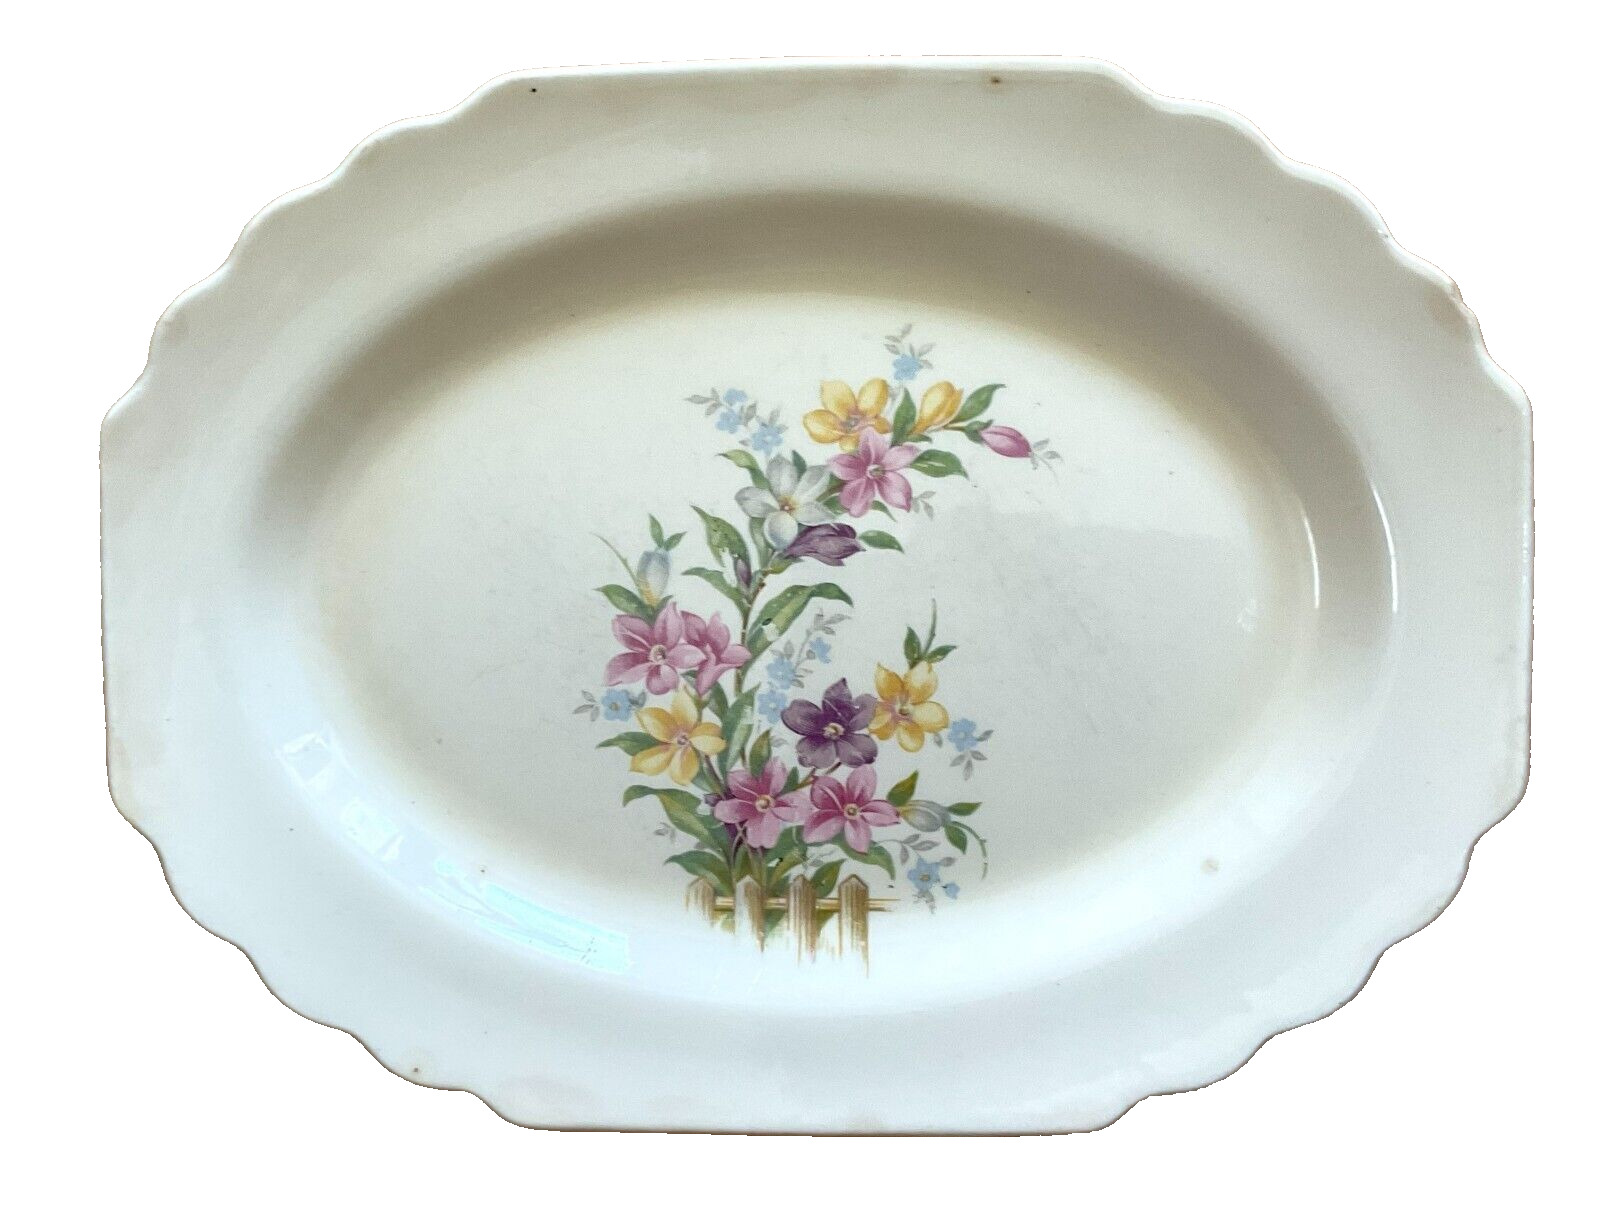 Almost Antique Plate, from the 1930s